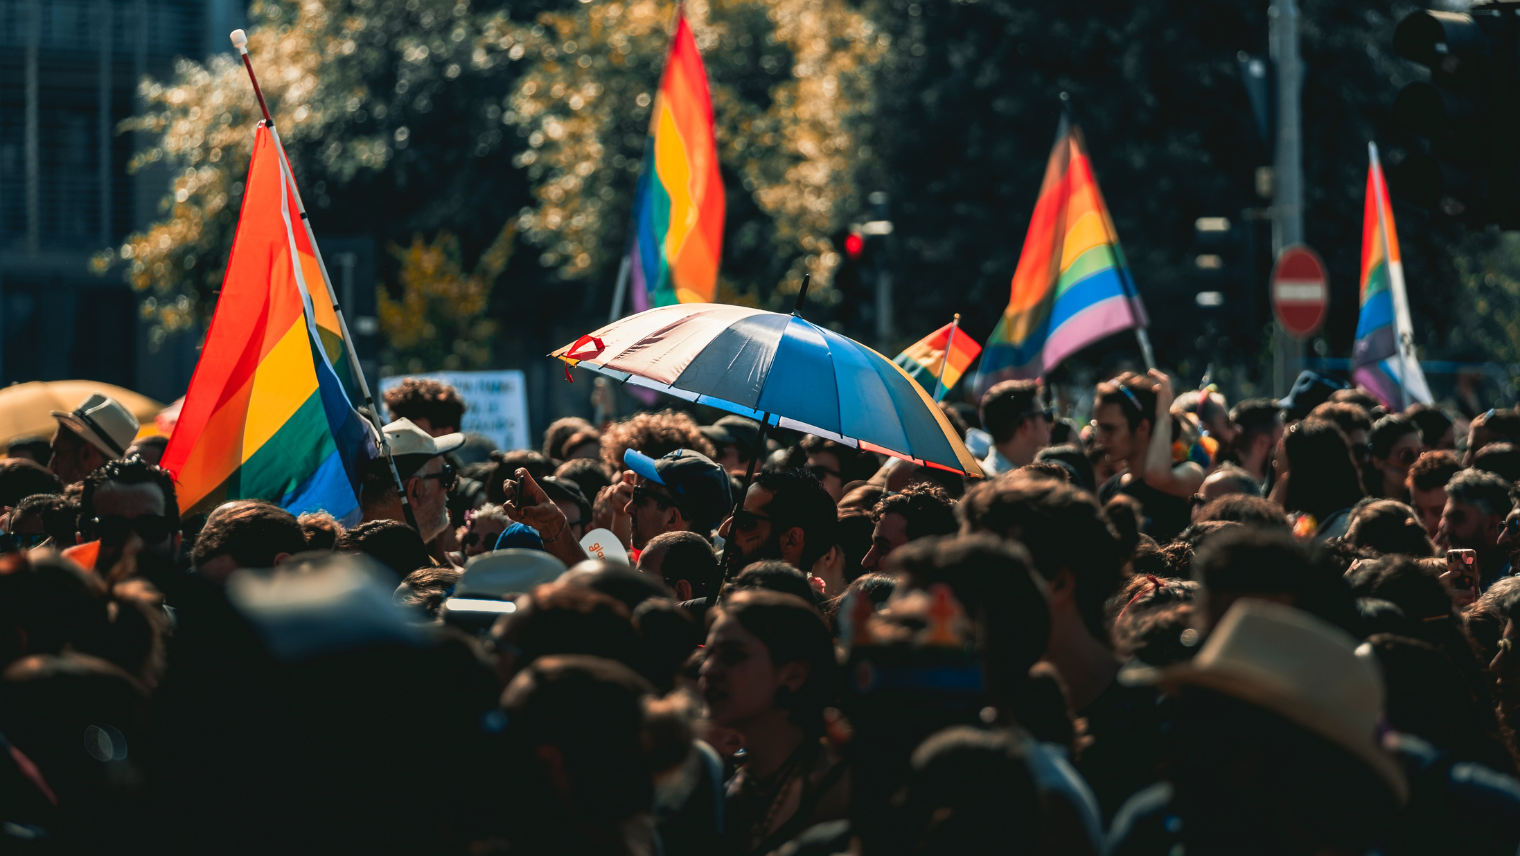 Image of a large crowd at a Pride event with some holding rainbow coloured flags or umbrellas